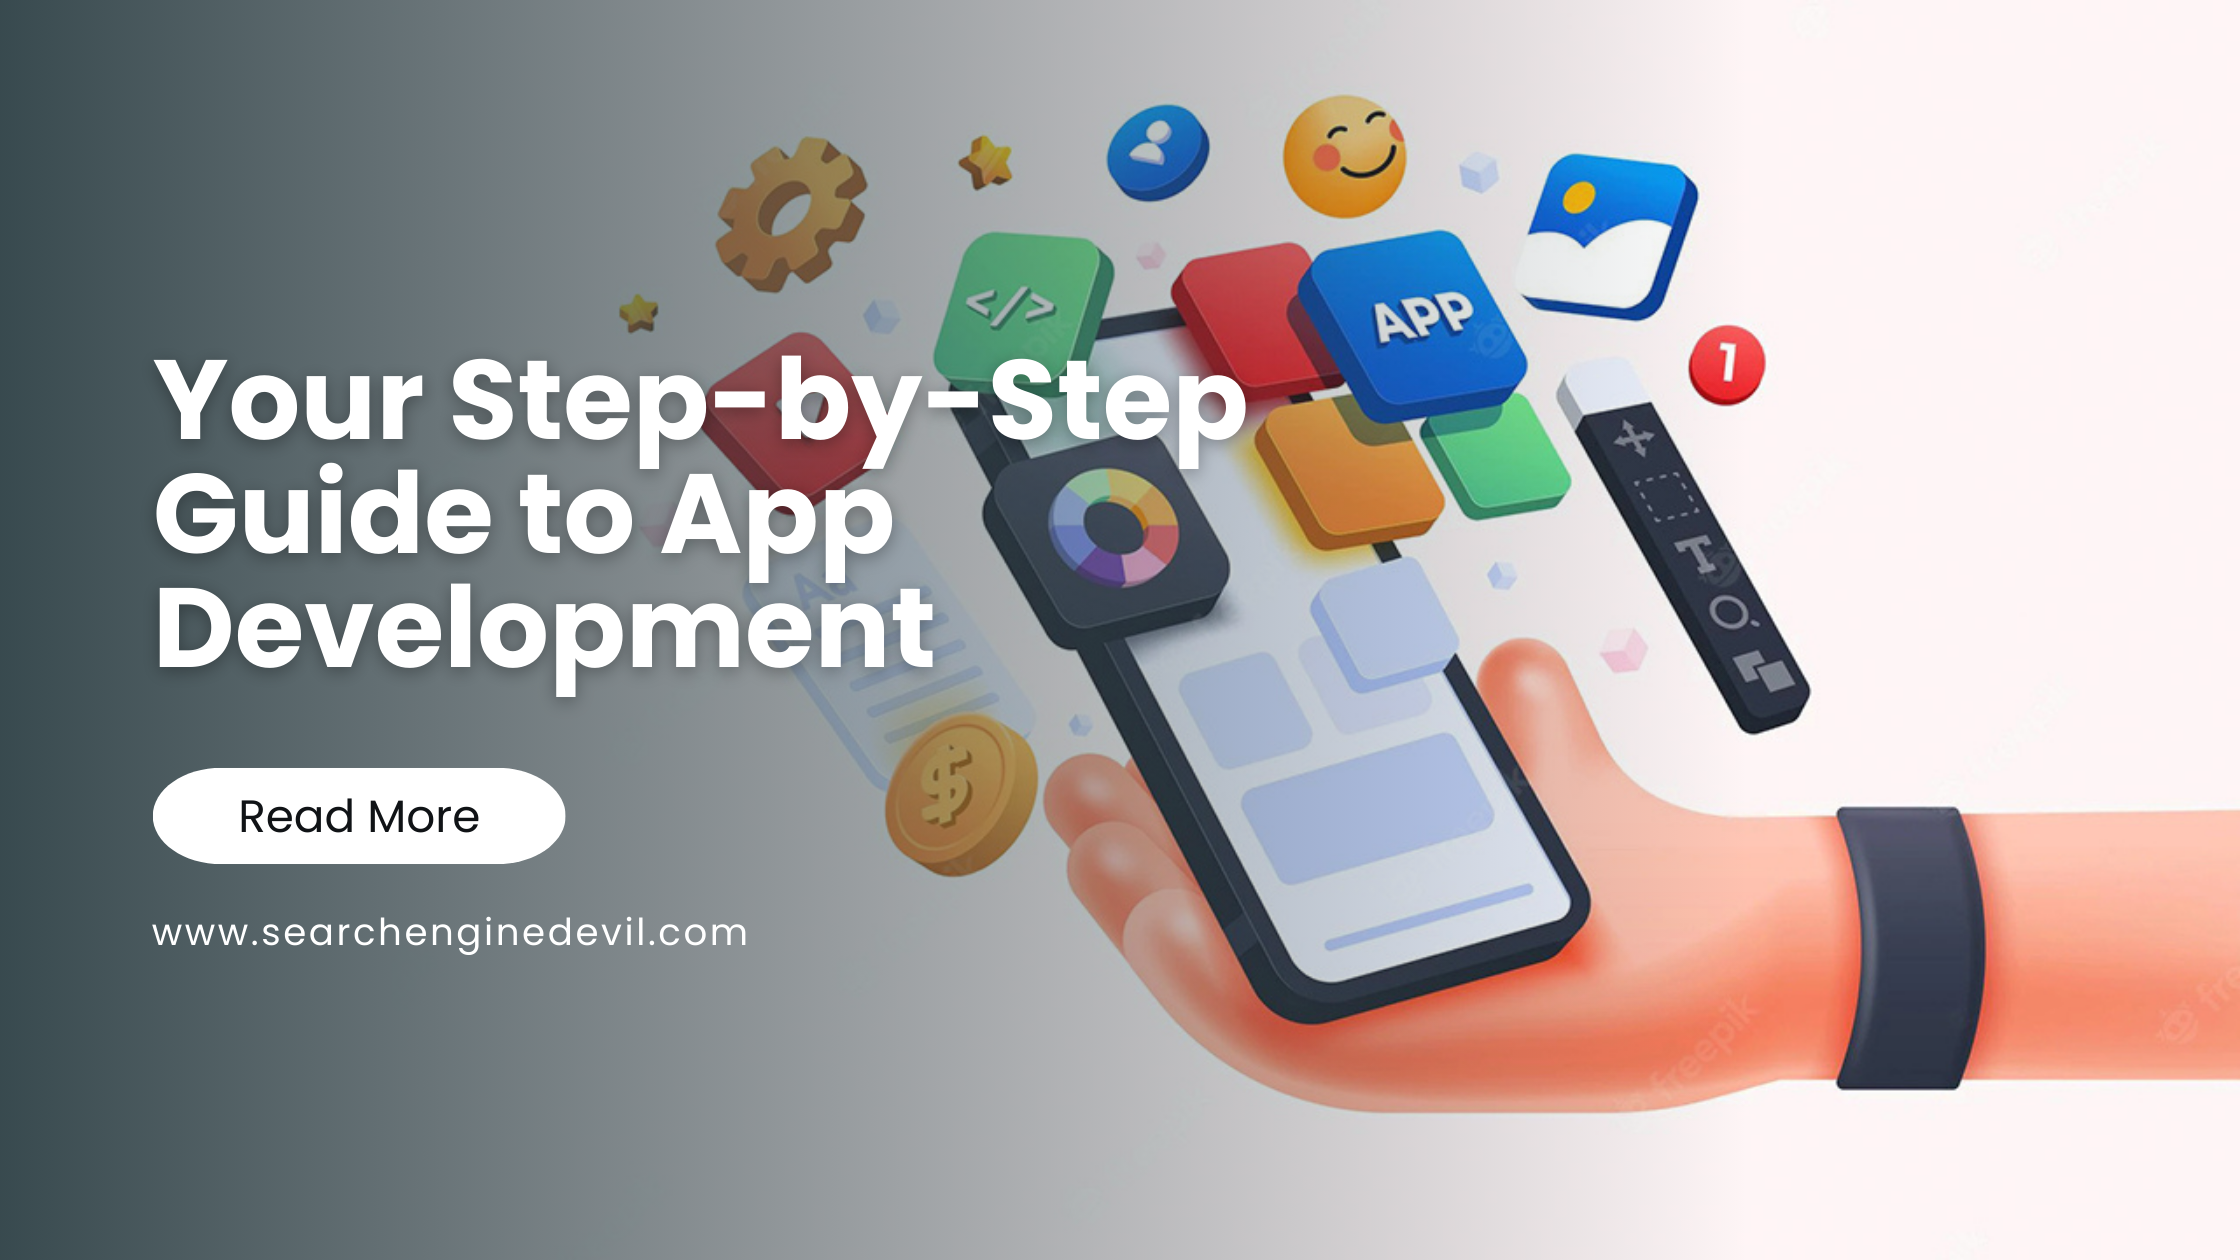 Your Step-by-Step Guide to App Development